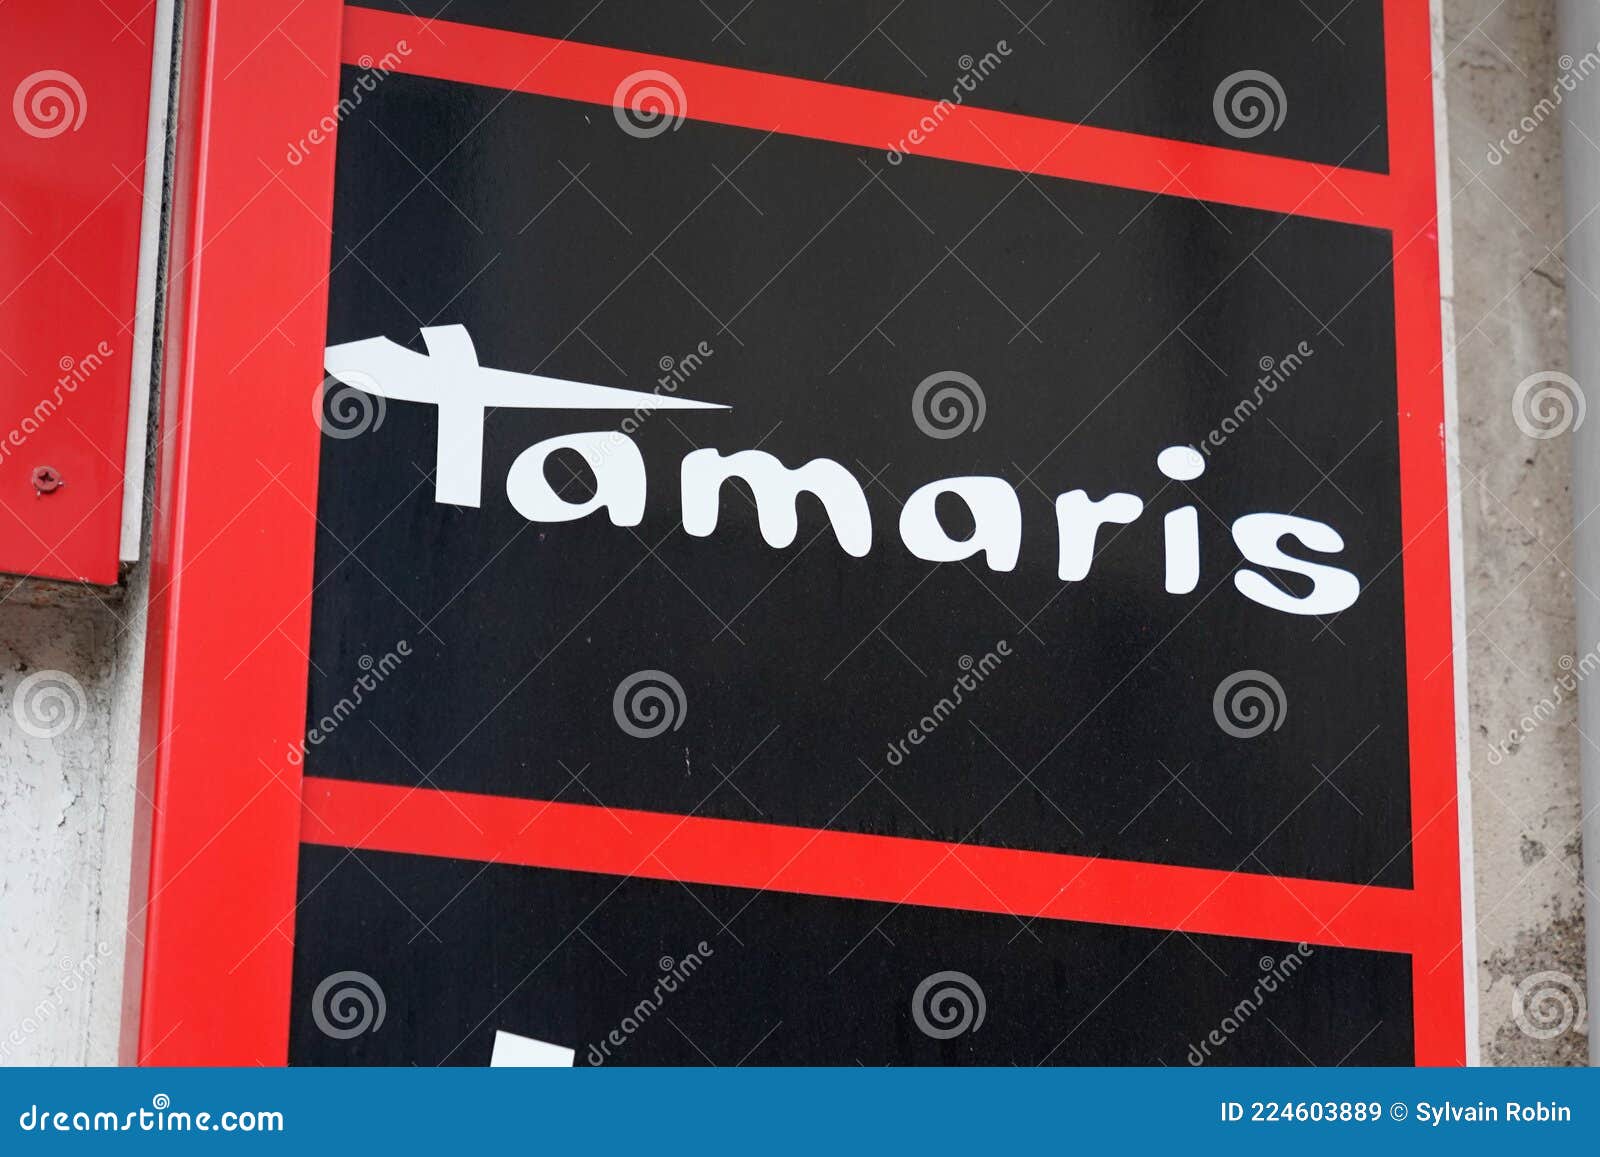 Tamaris Sign Bran and Logo Text of Footwear Company Provides Women Shoes Shop Stock Image - Image of front, city: